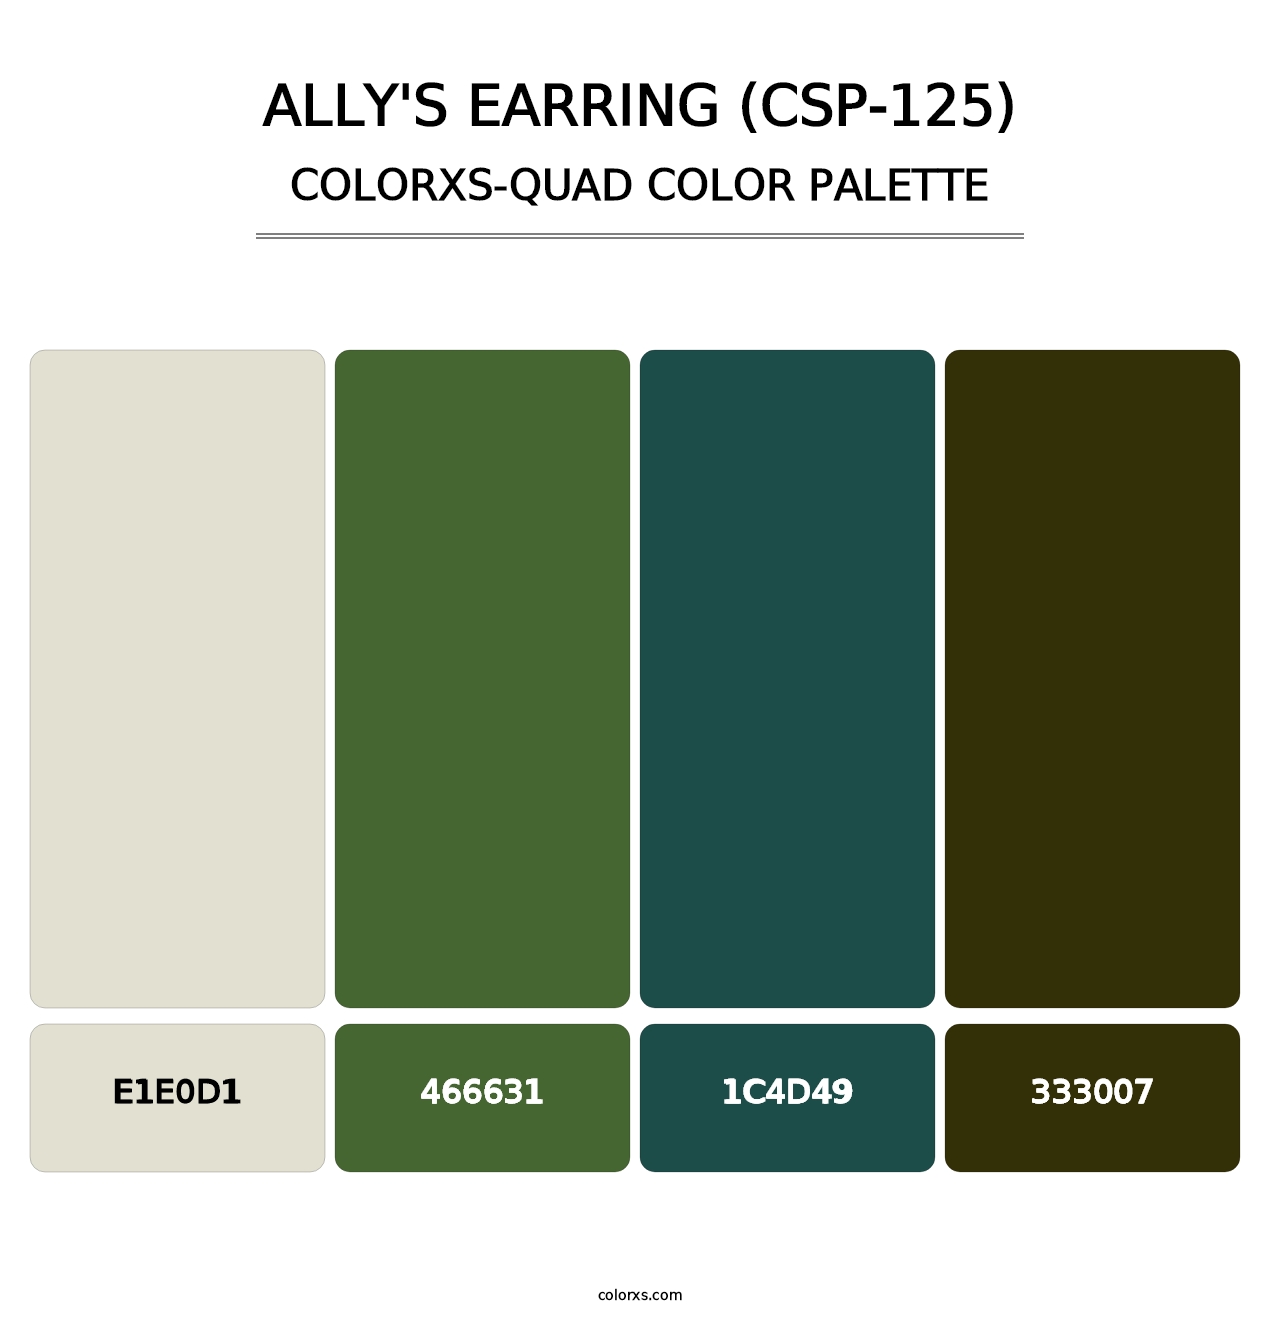 Ally's Earring (CSP-125) - Colorxs Quad Palette